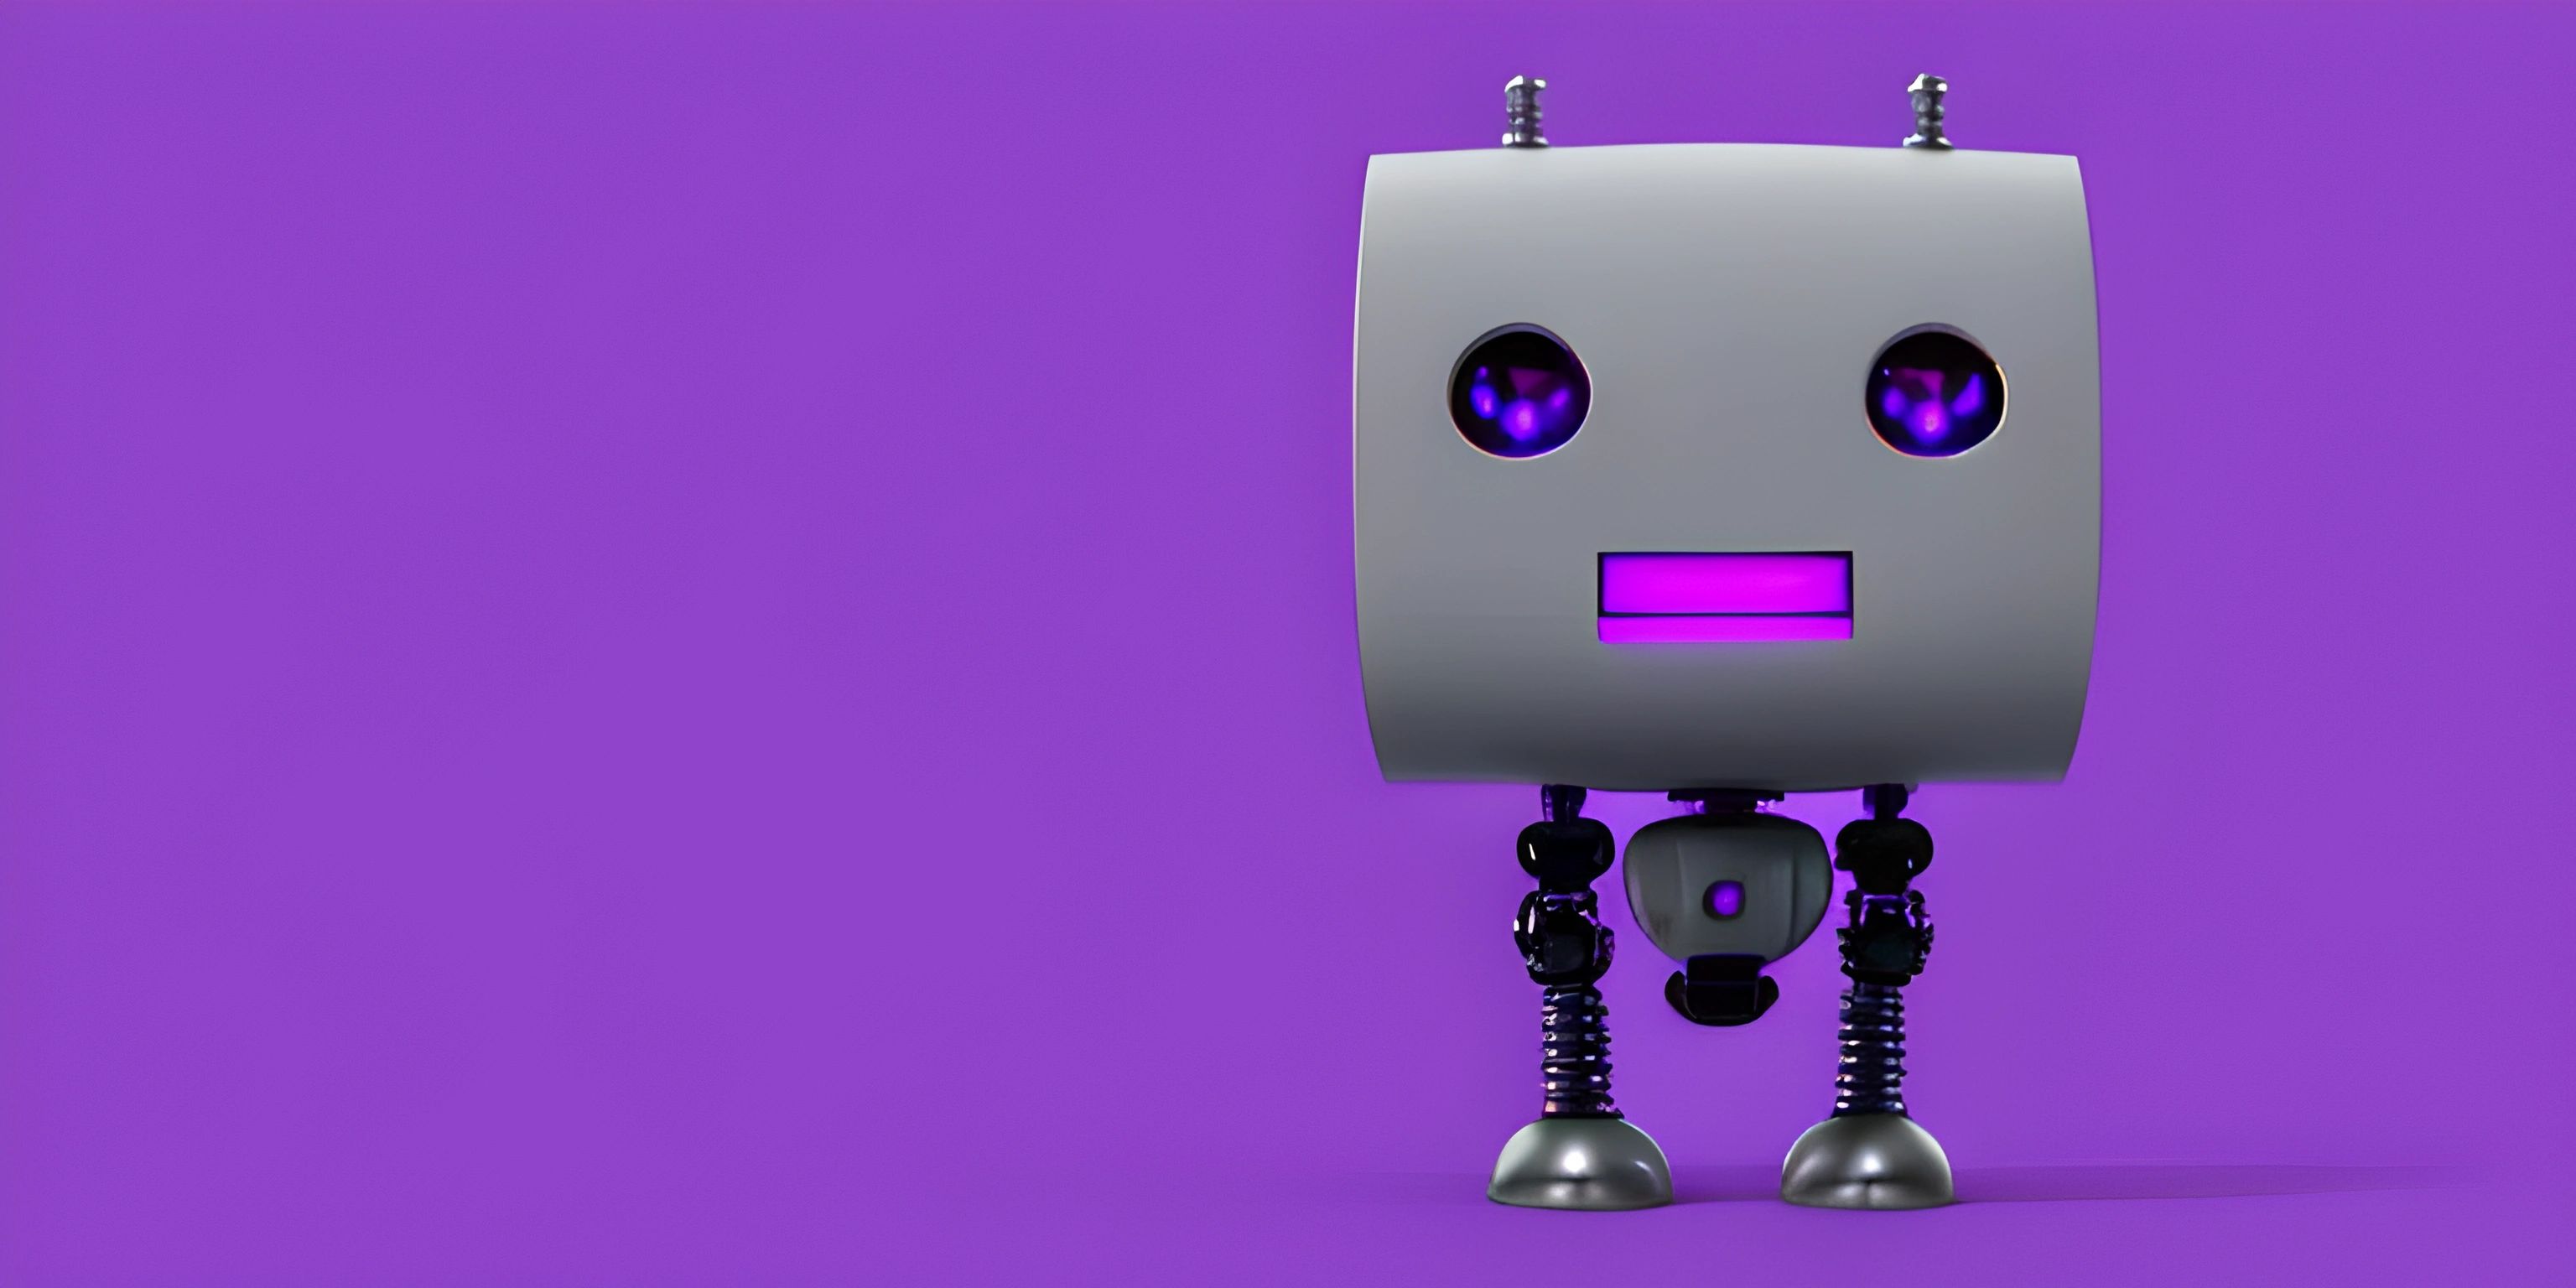 a silver robot with blue eyes standing next to purple wall and another robotic figure standing in the background